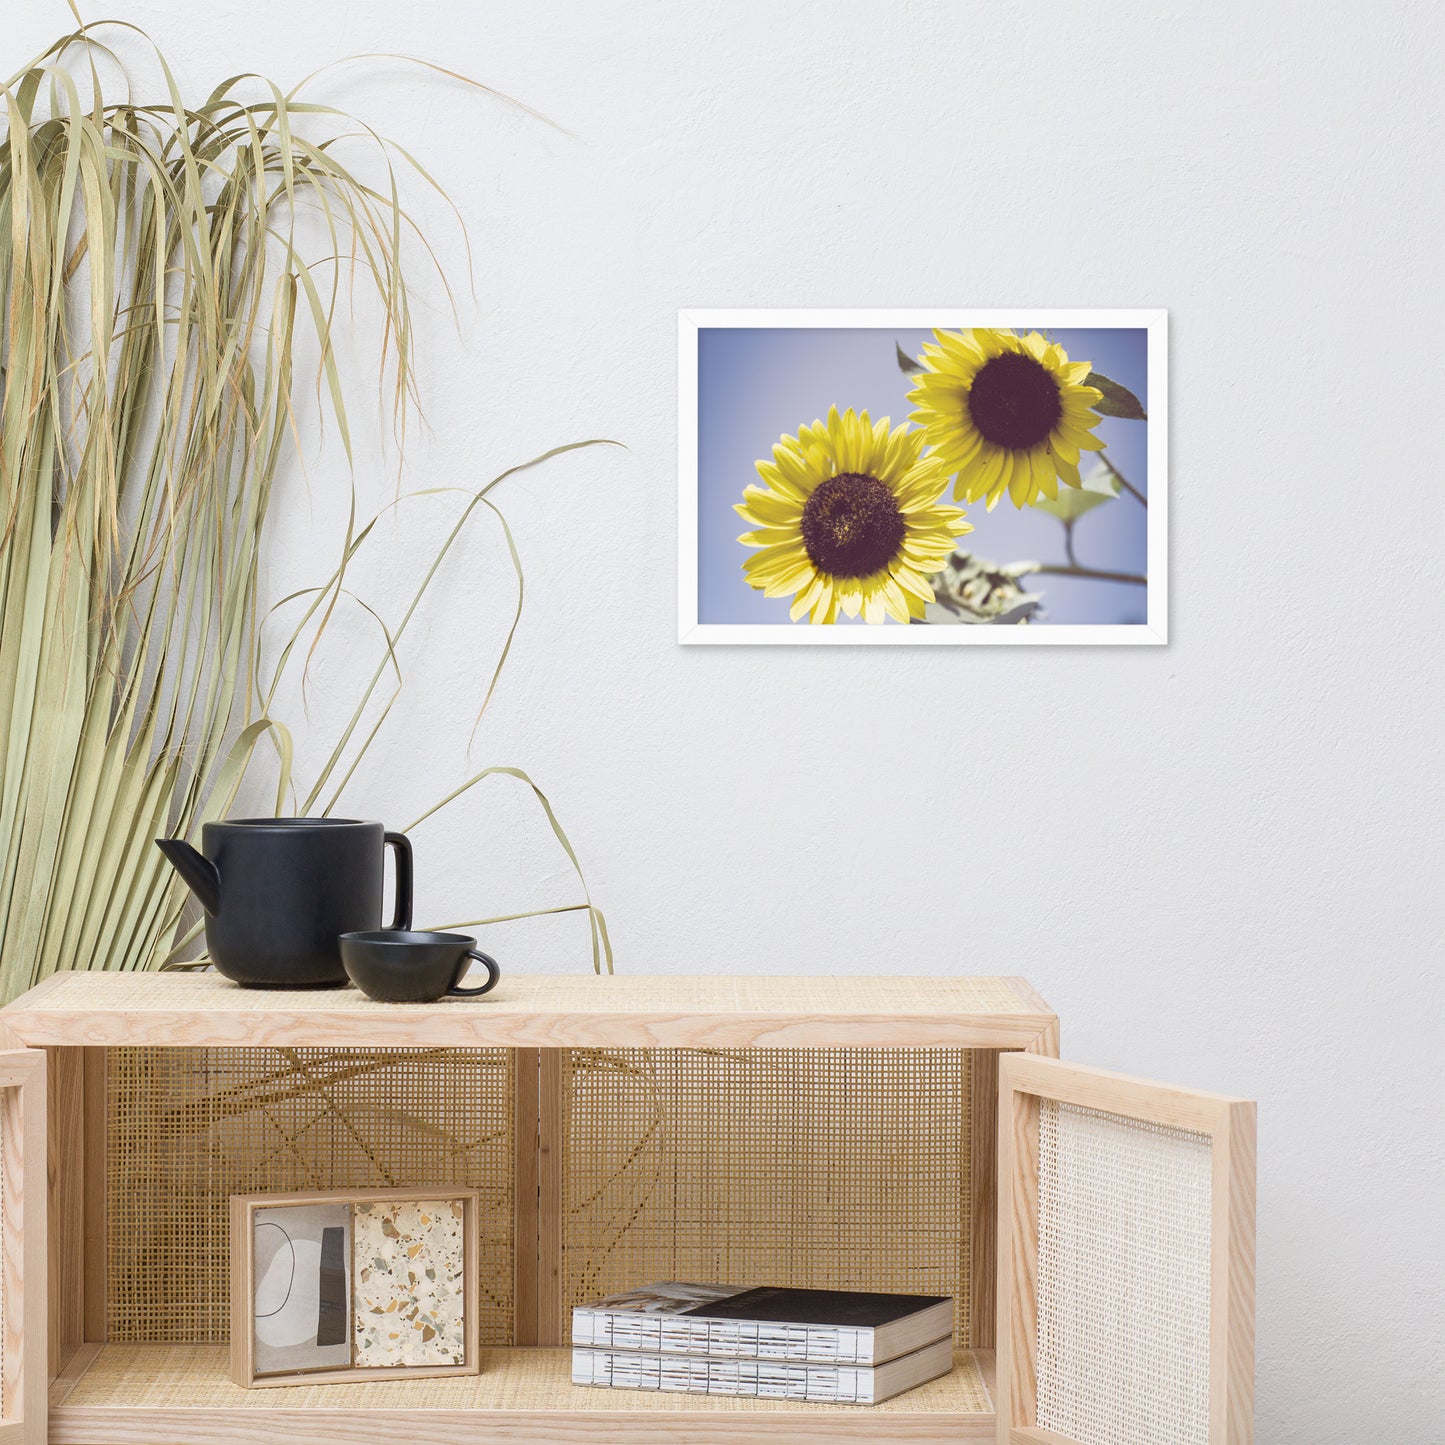 Modern Flower Prints: Aged Sunflowers Against Sky Abstract / Minimal / Rustic / Country / Farmhouse Style / Floral / Botanical / Nature Photo Framed Wall Art Print - Artwork - Wall Decor - Home Decor